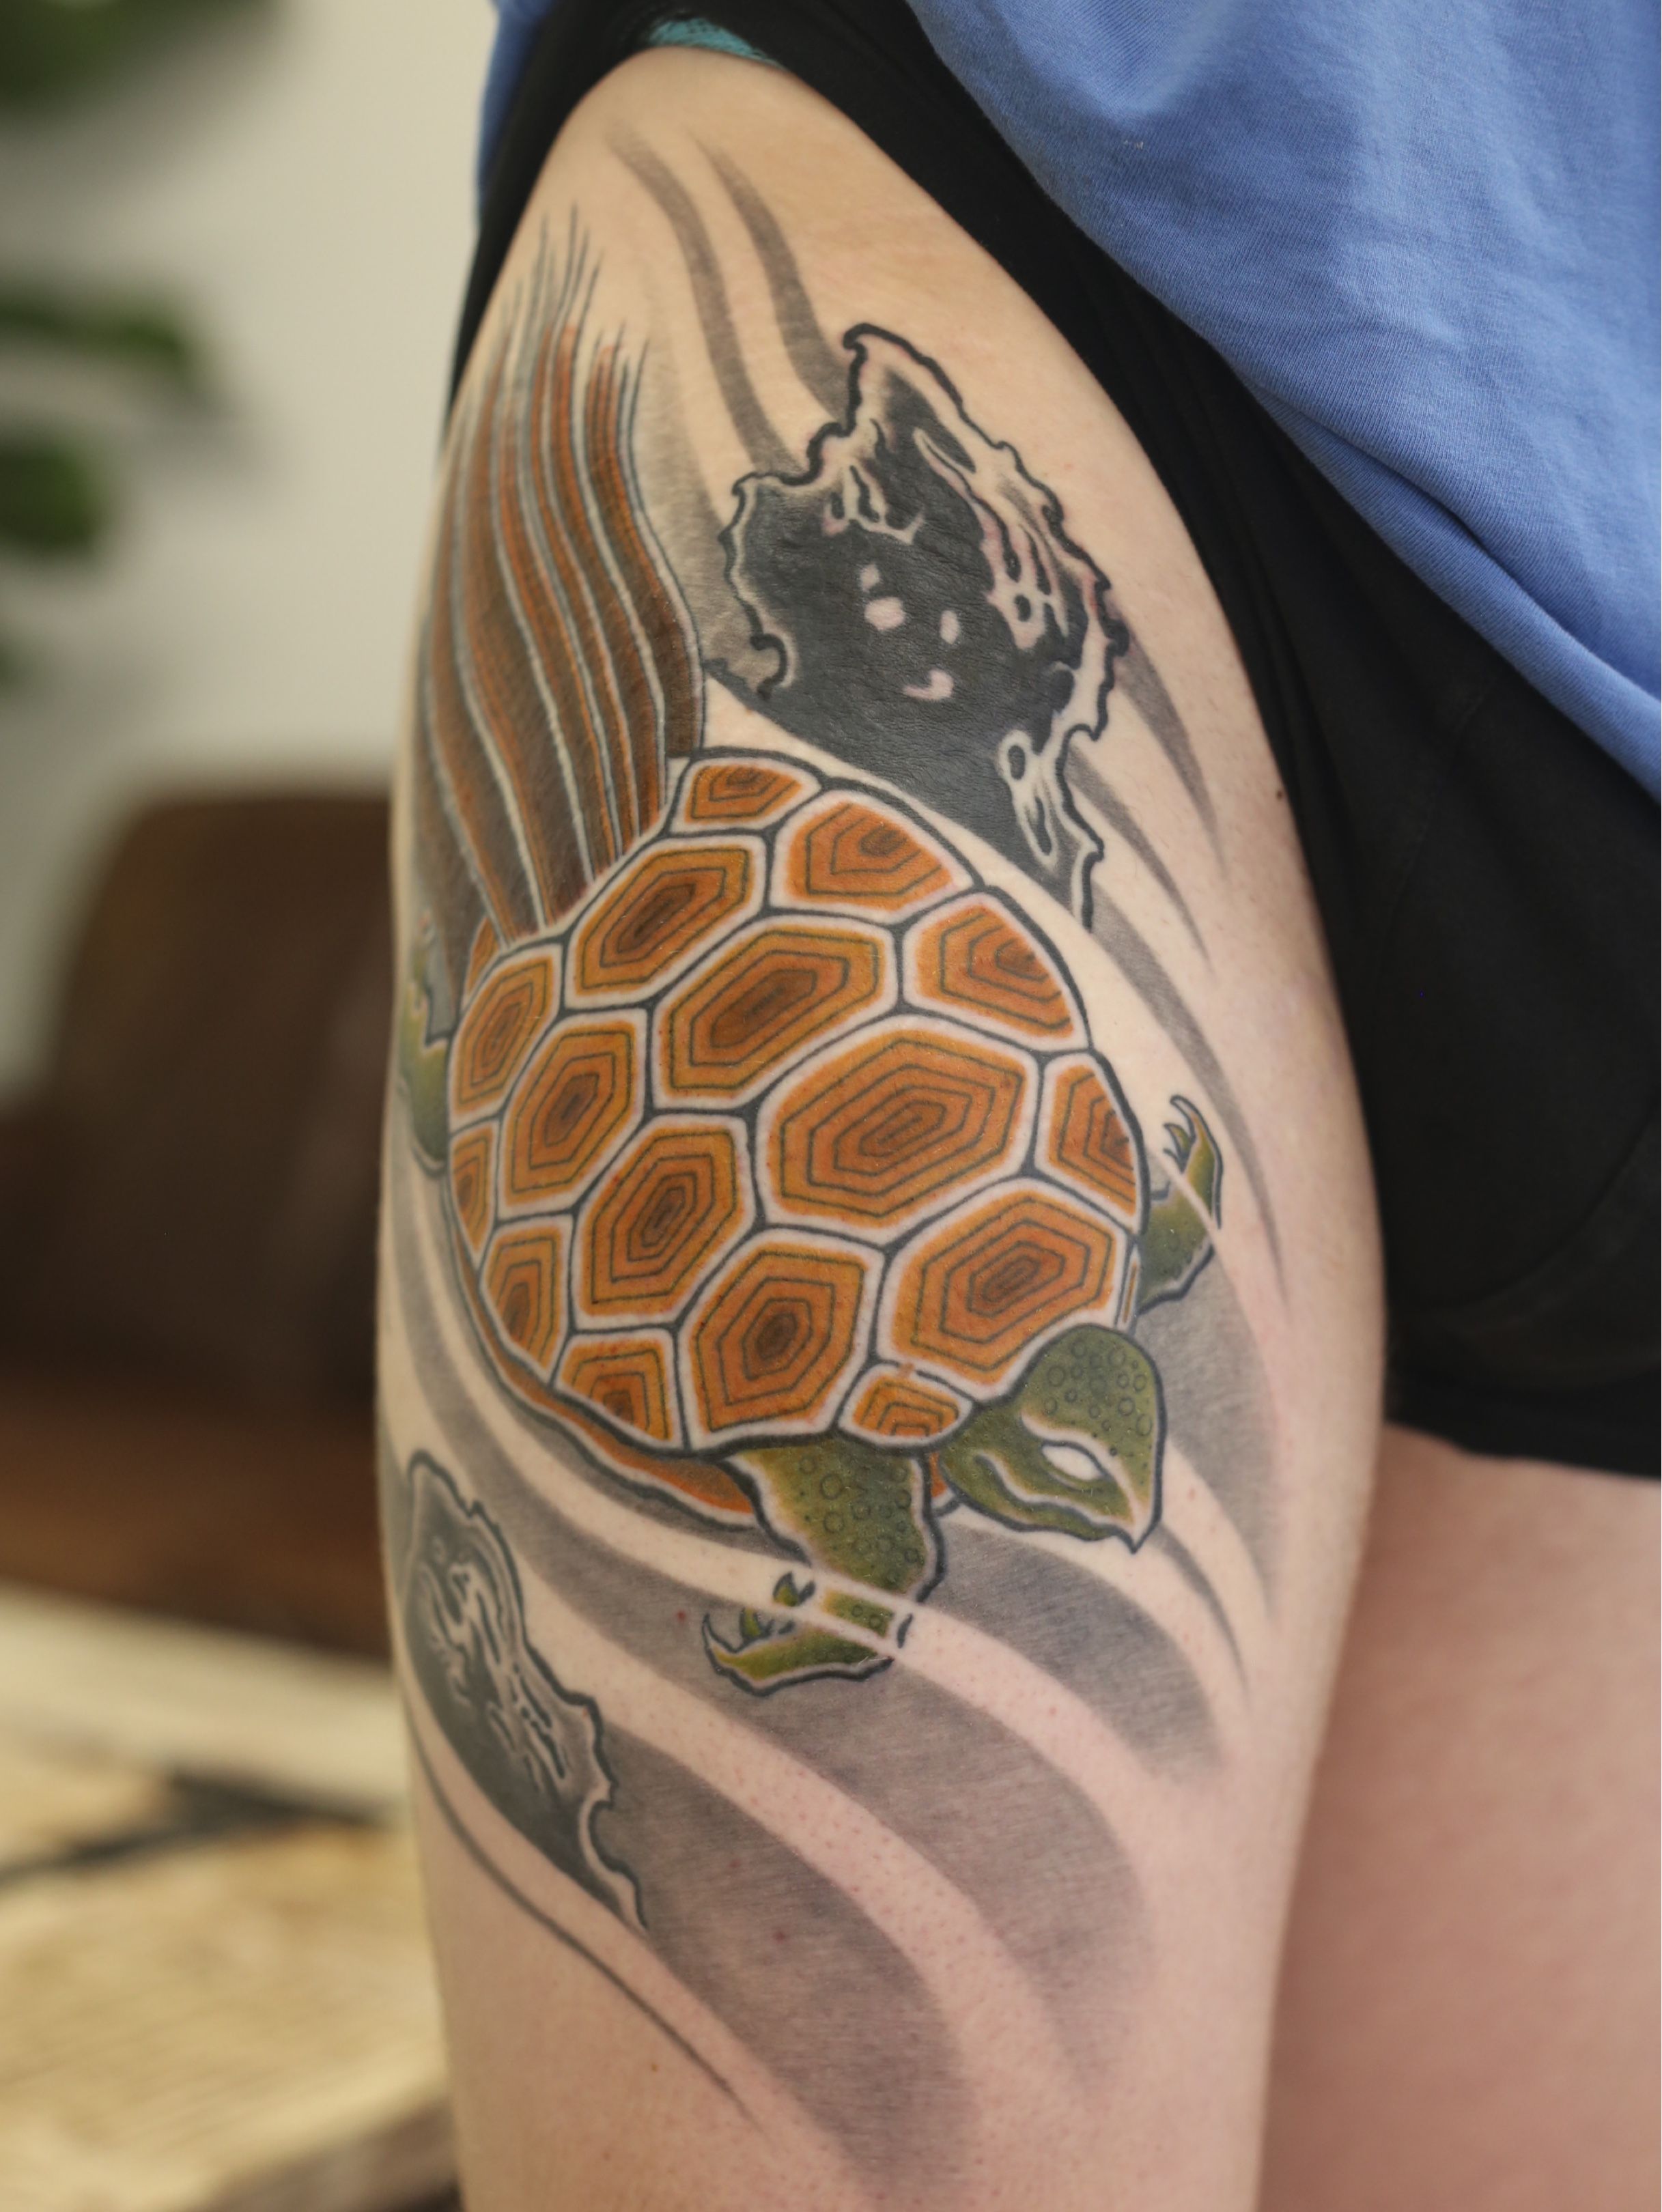 30 Japanese Turtle Tattoo Ideas For Men  Shelled Designs